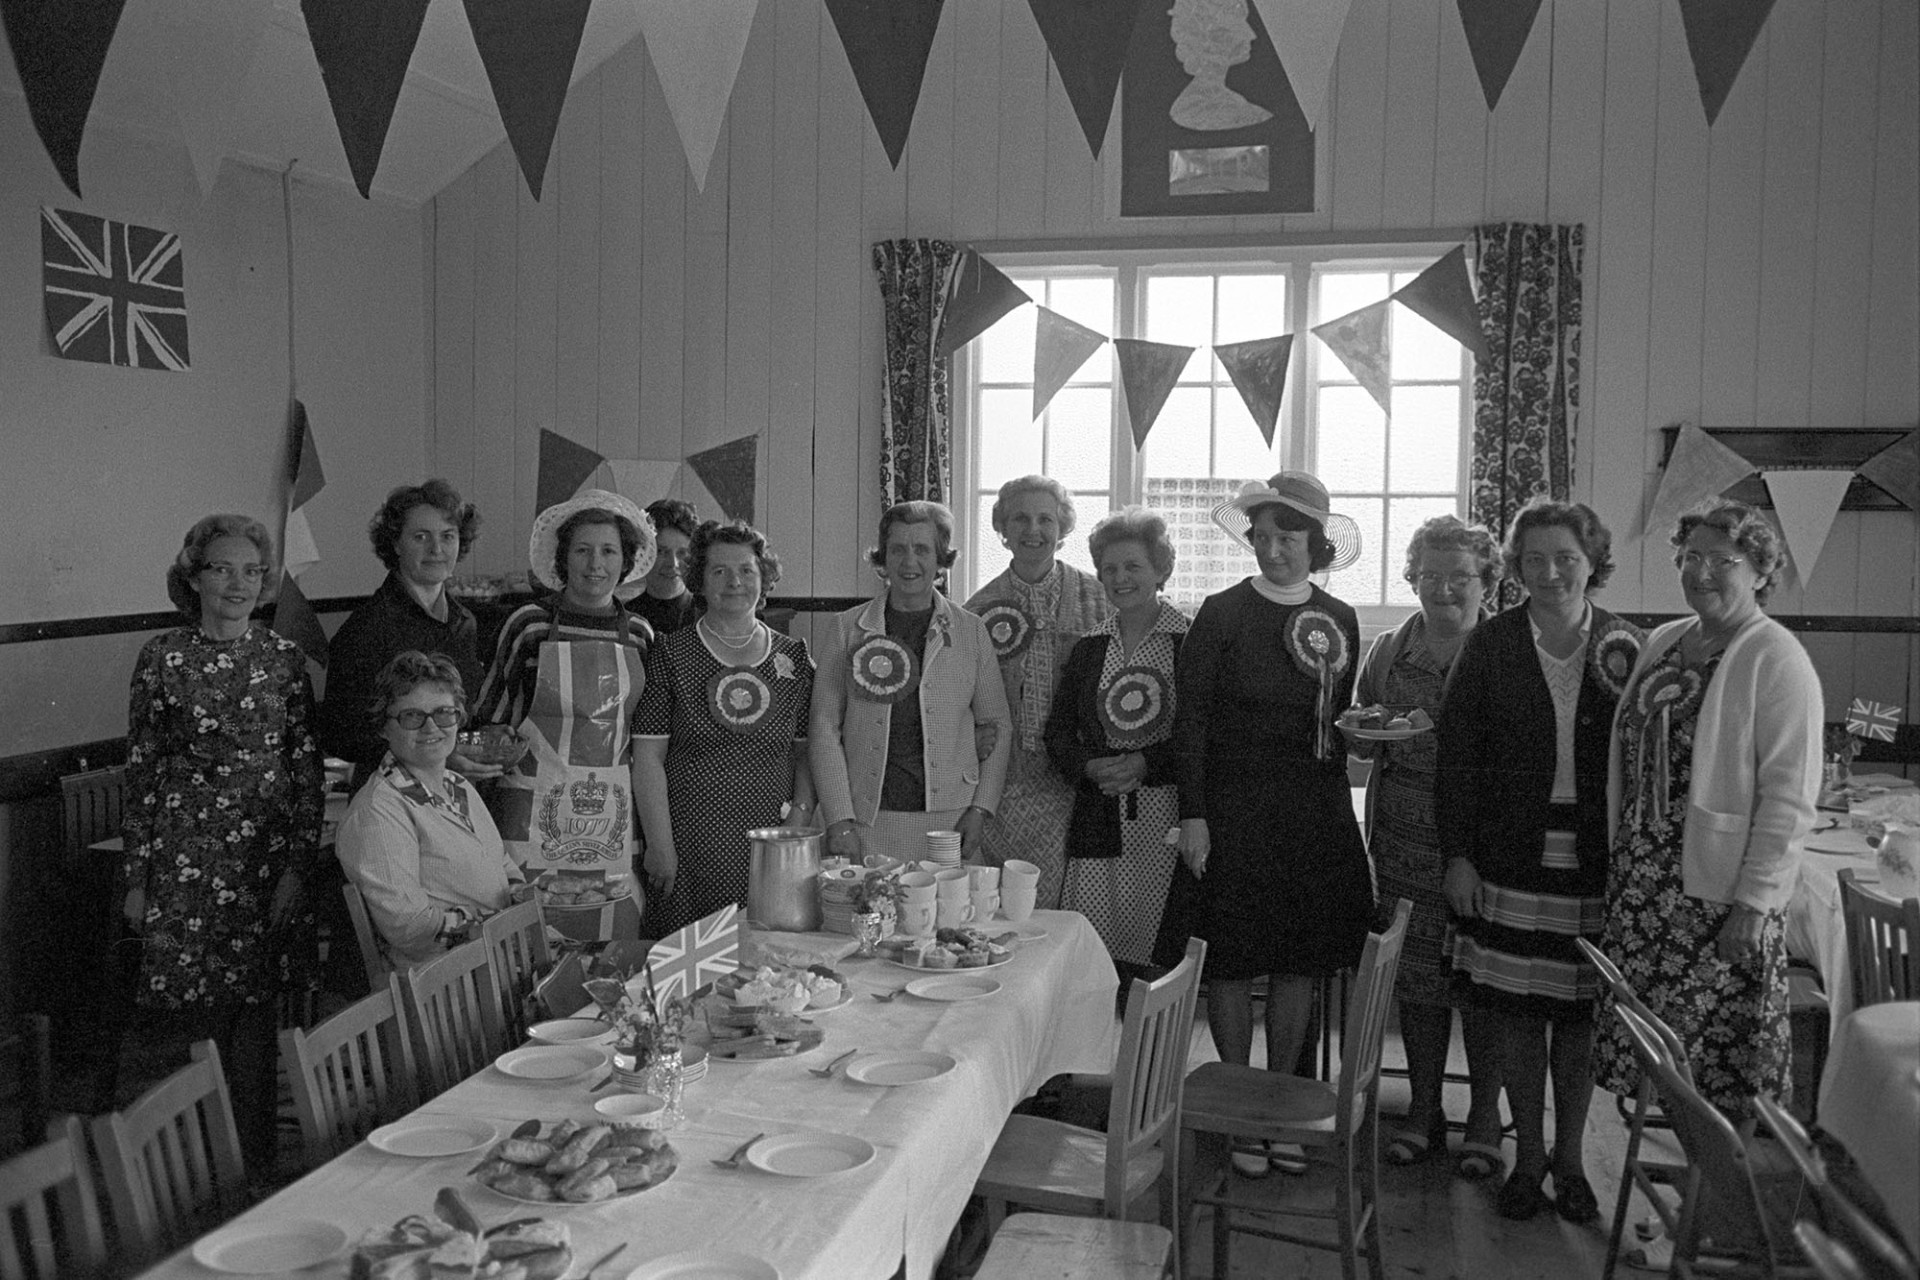 Group of women, in village hall before Jubilee tea which they had prepared.
[Women in High Bickington village hall standing by the tea they have prepared for the Silver Jubilee of Queen Elizabeth II. The tables are laid with cakes and sandwiches and the hall is decorated with bunting and union jack flags. Some of the women are wearing rosettes.]